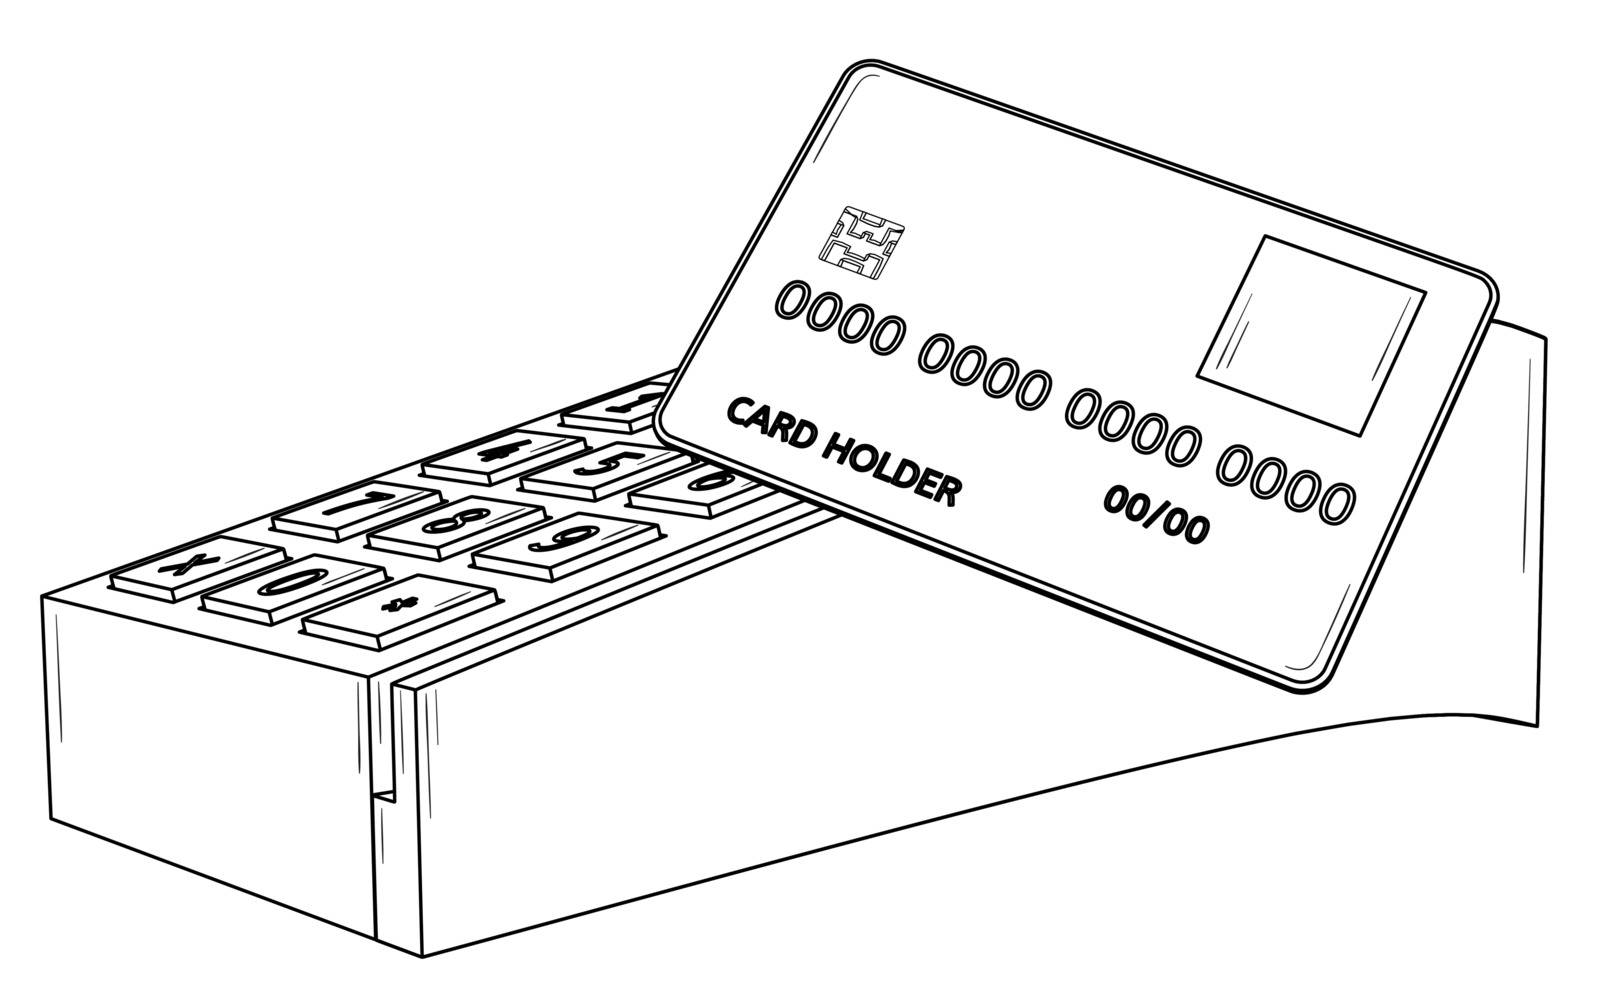 Payment terminal with credit card for payment of services. Black outline illustration on white background. Sketch.